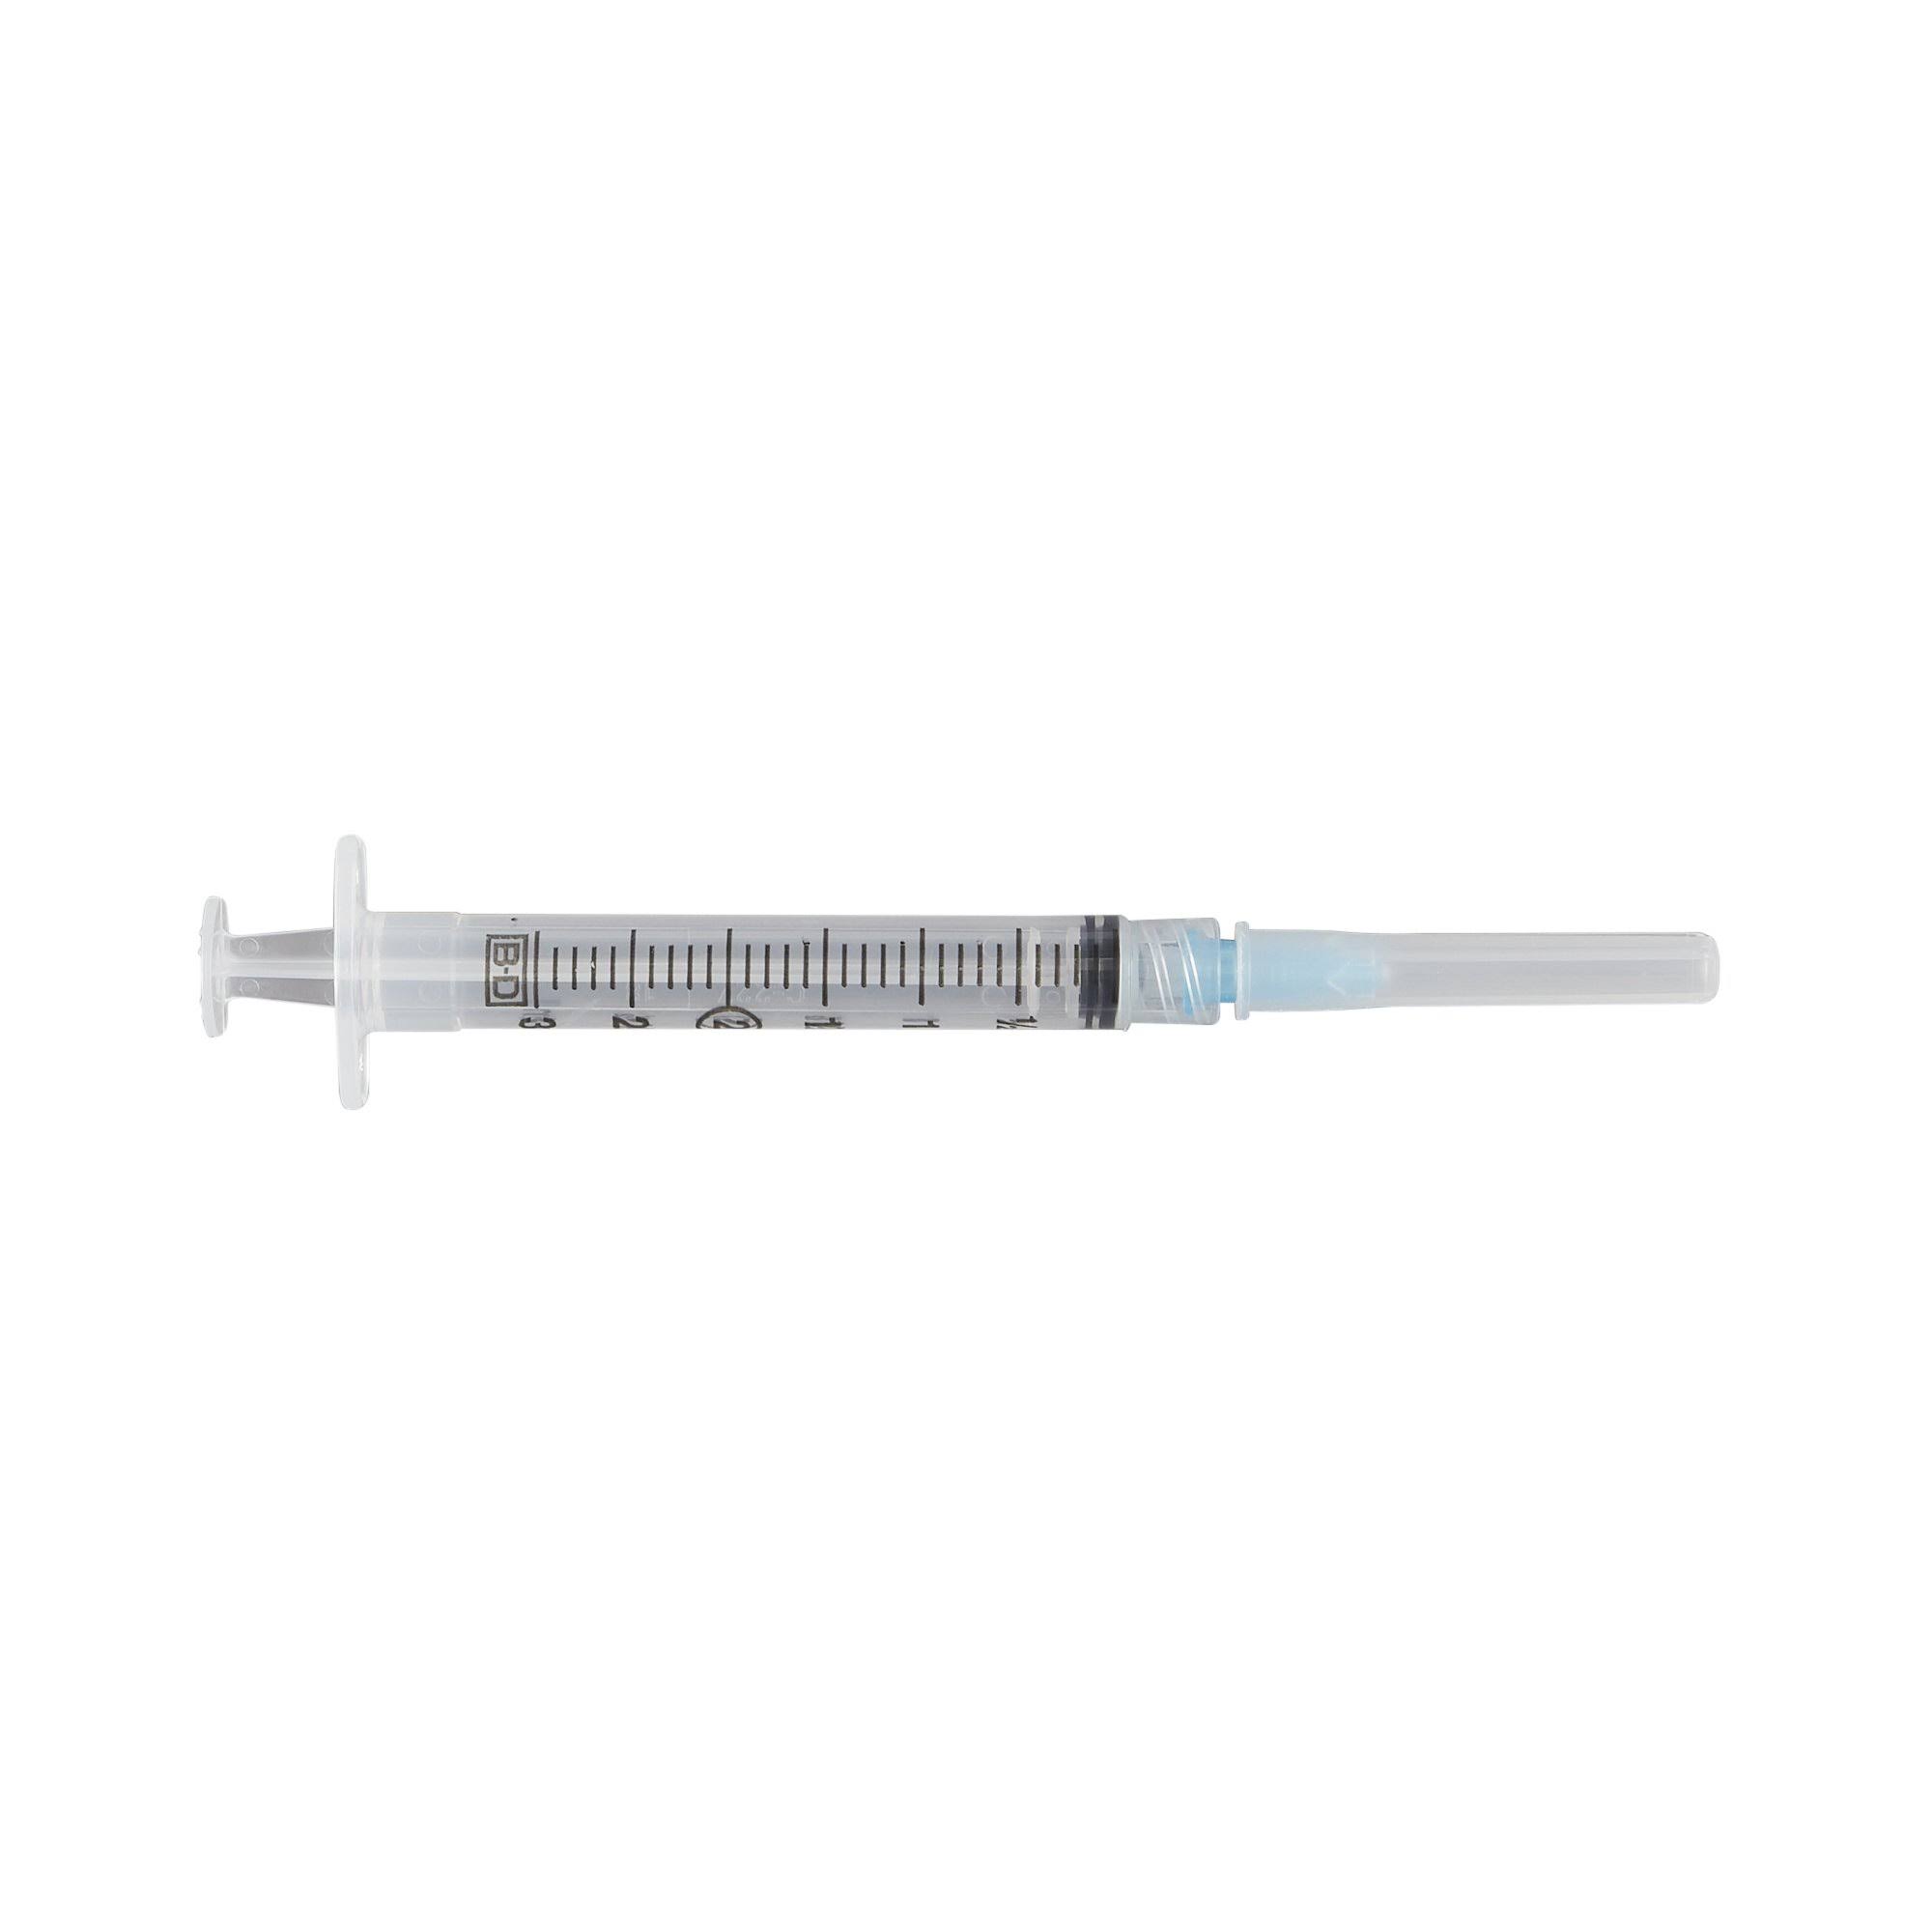 Bd Luer-lok Syringe With Detachable Precisionglide Needle -3 Ml, 25g X 1 In (309581)